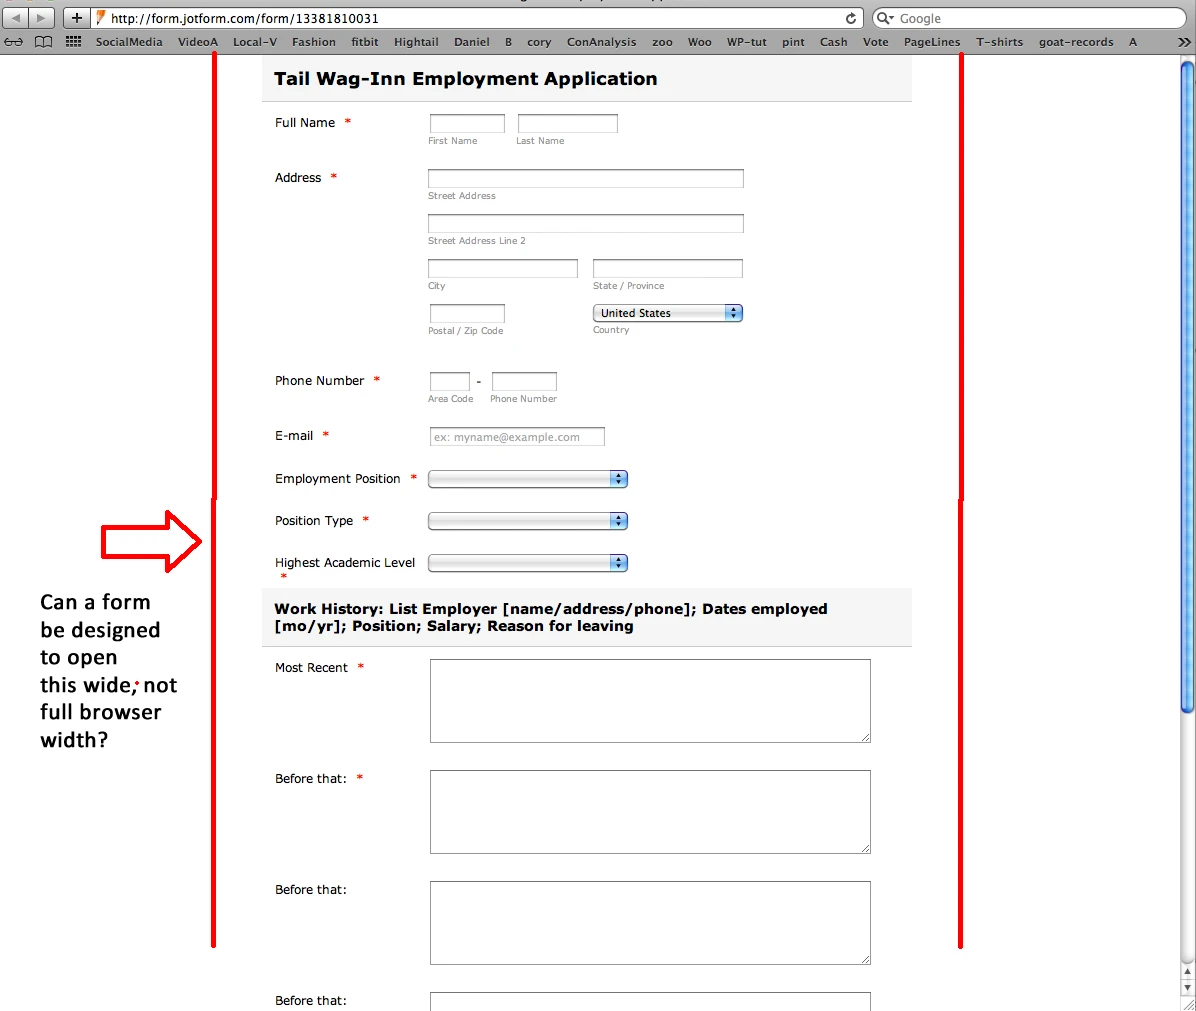 Form fields are not displaying in the email notification that our client will receive after Image 1 Screenshot 20